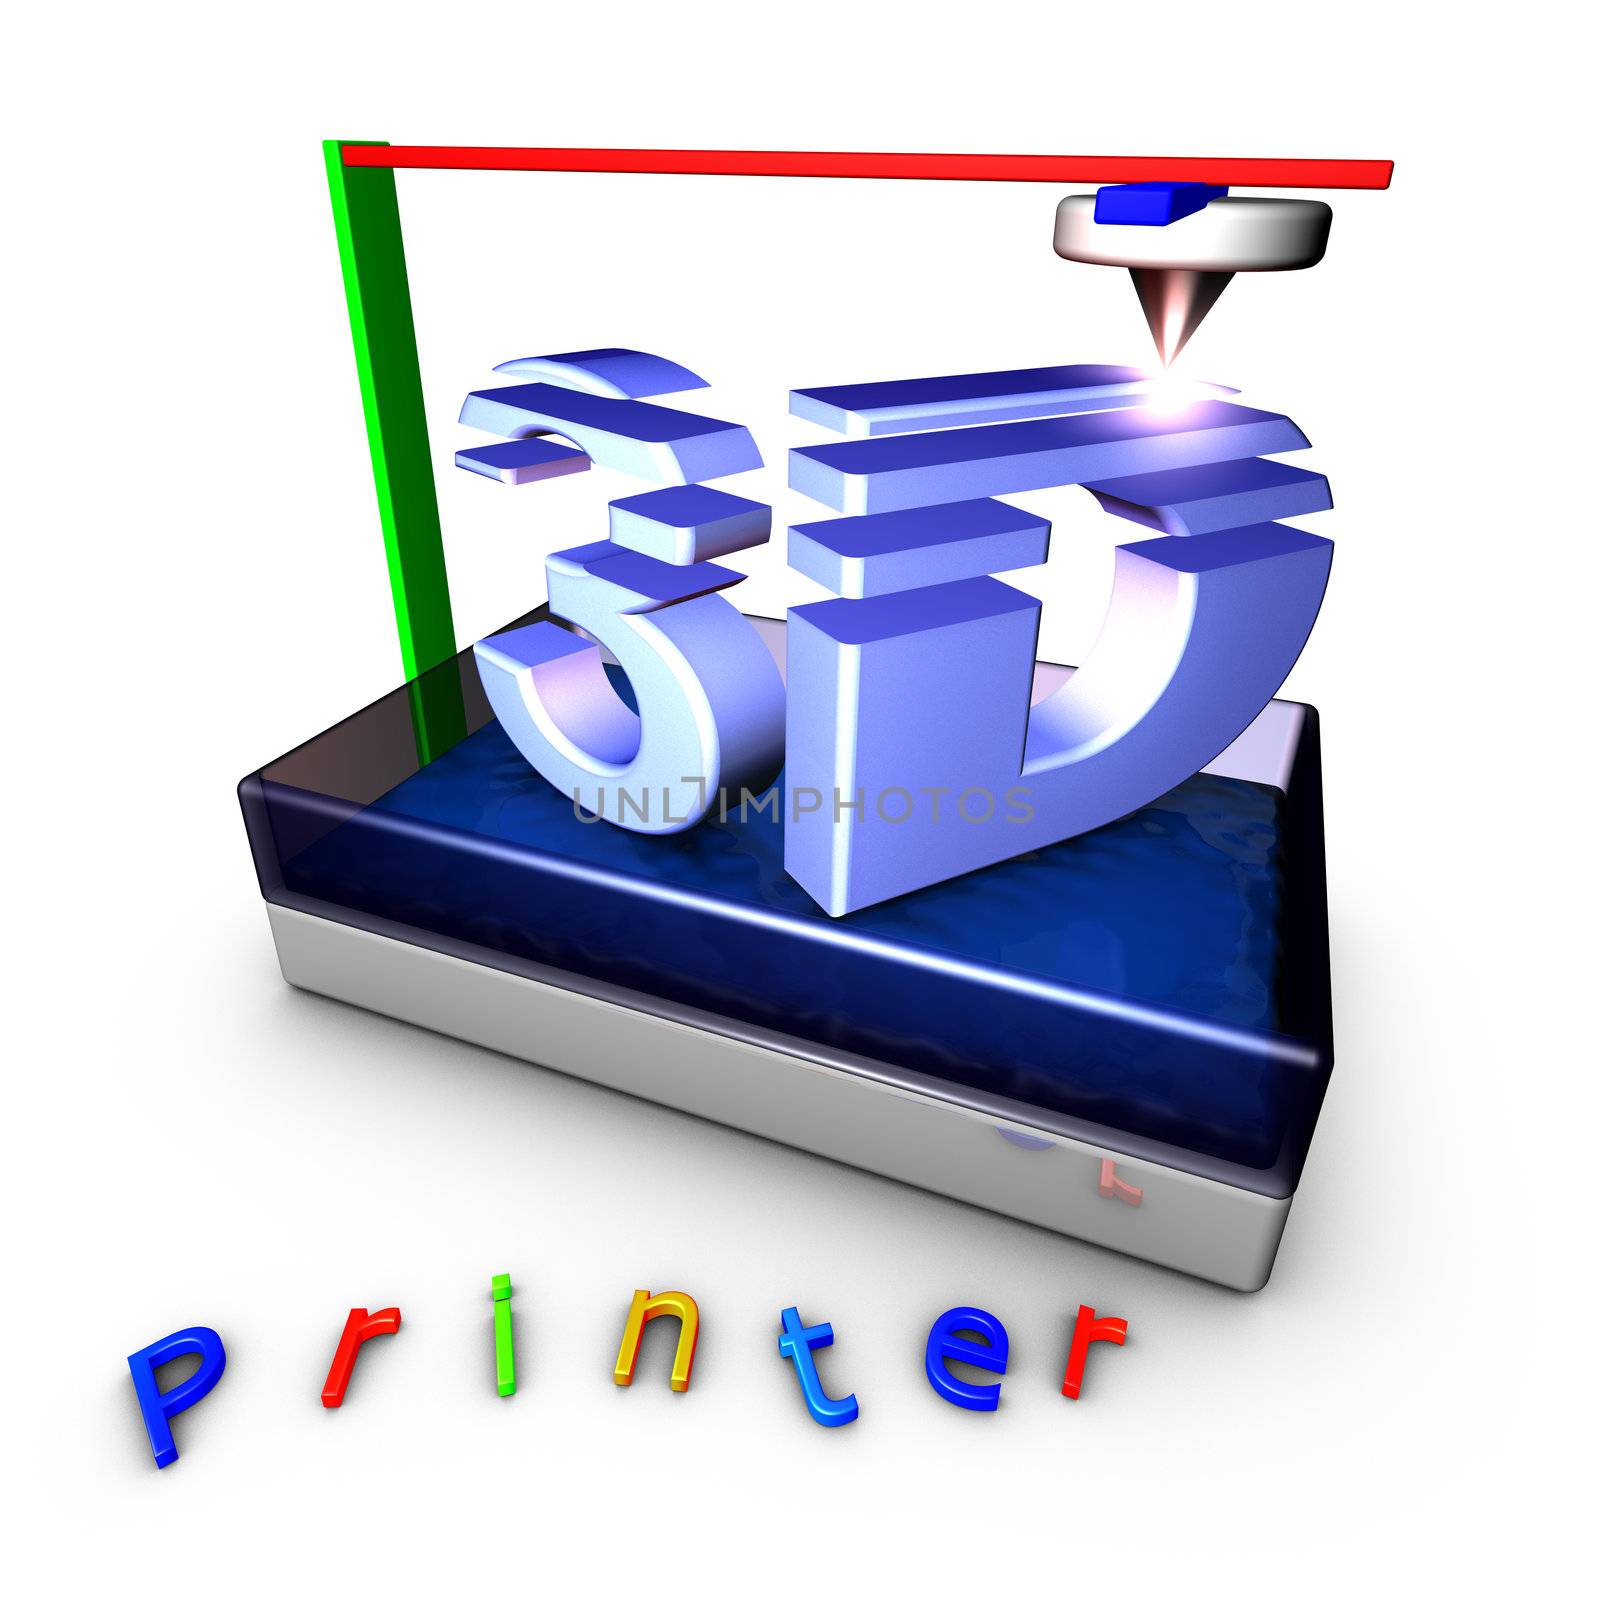 3D Printer using photopolymerization produces a solid object from a liquid. The three axes of the machine are represented by colors: Red, Green and Blue